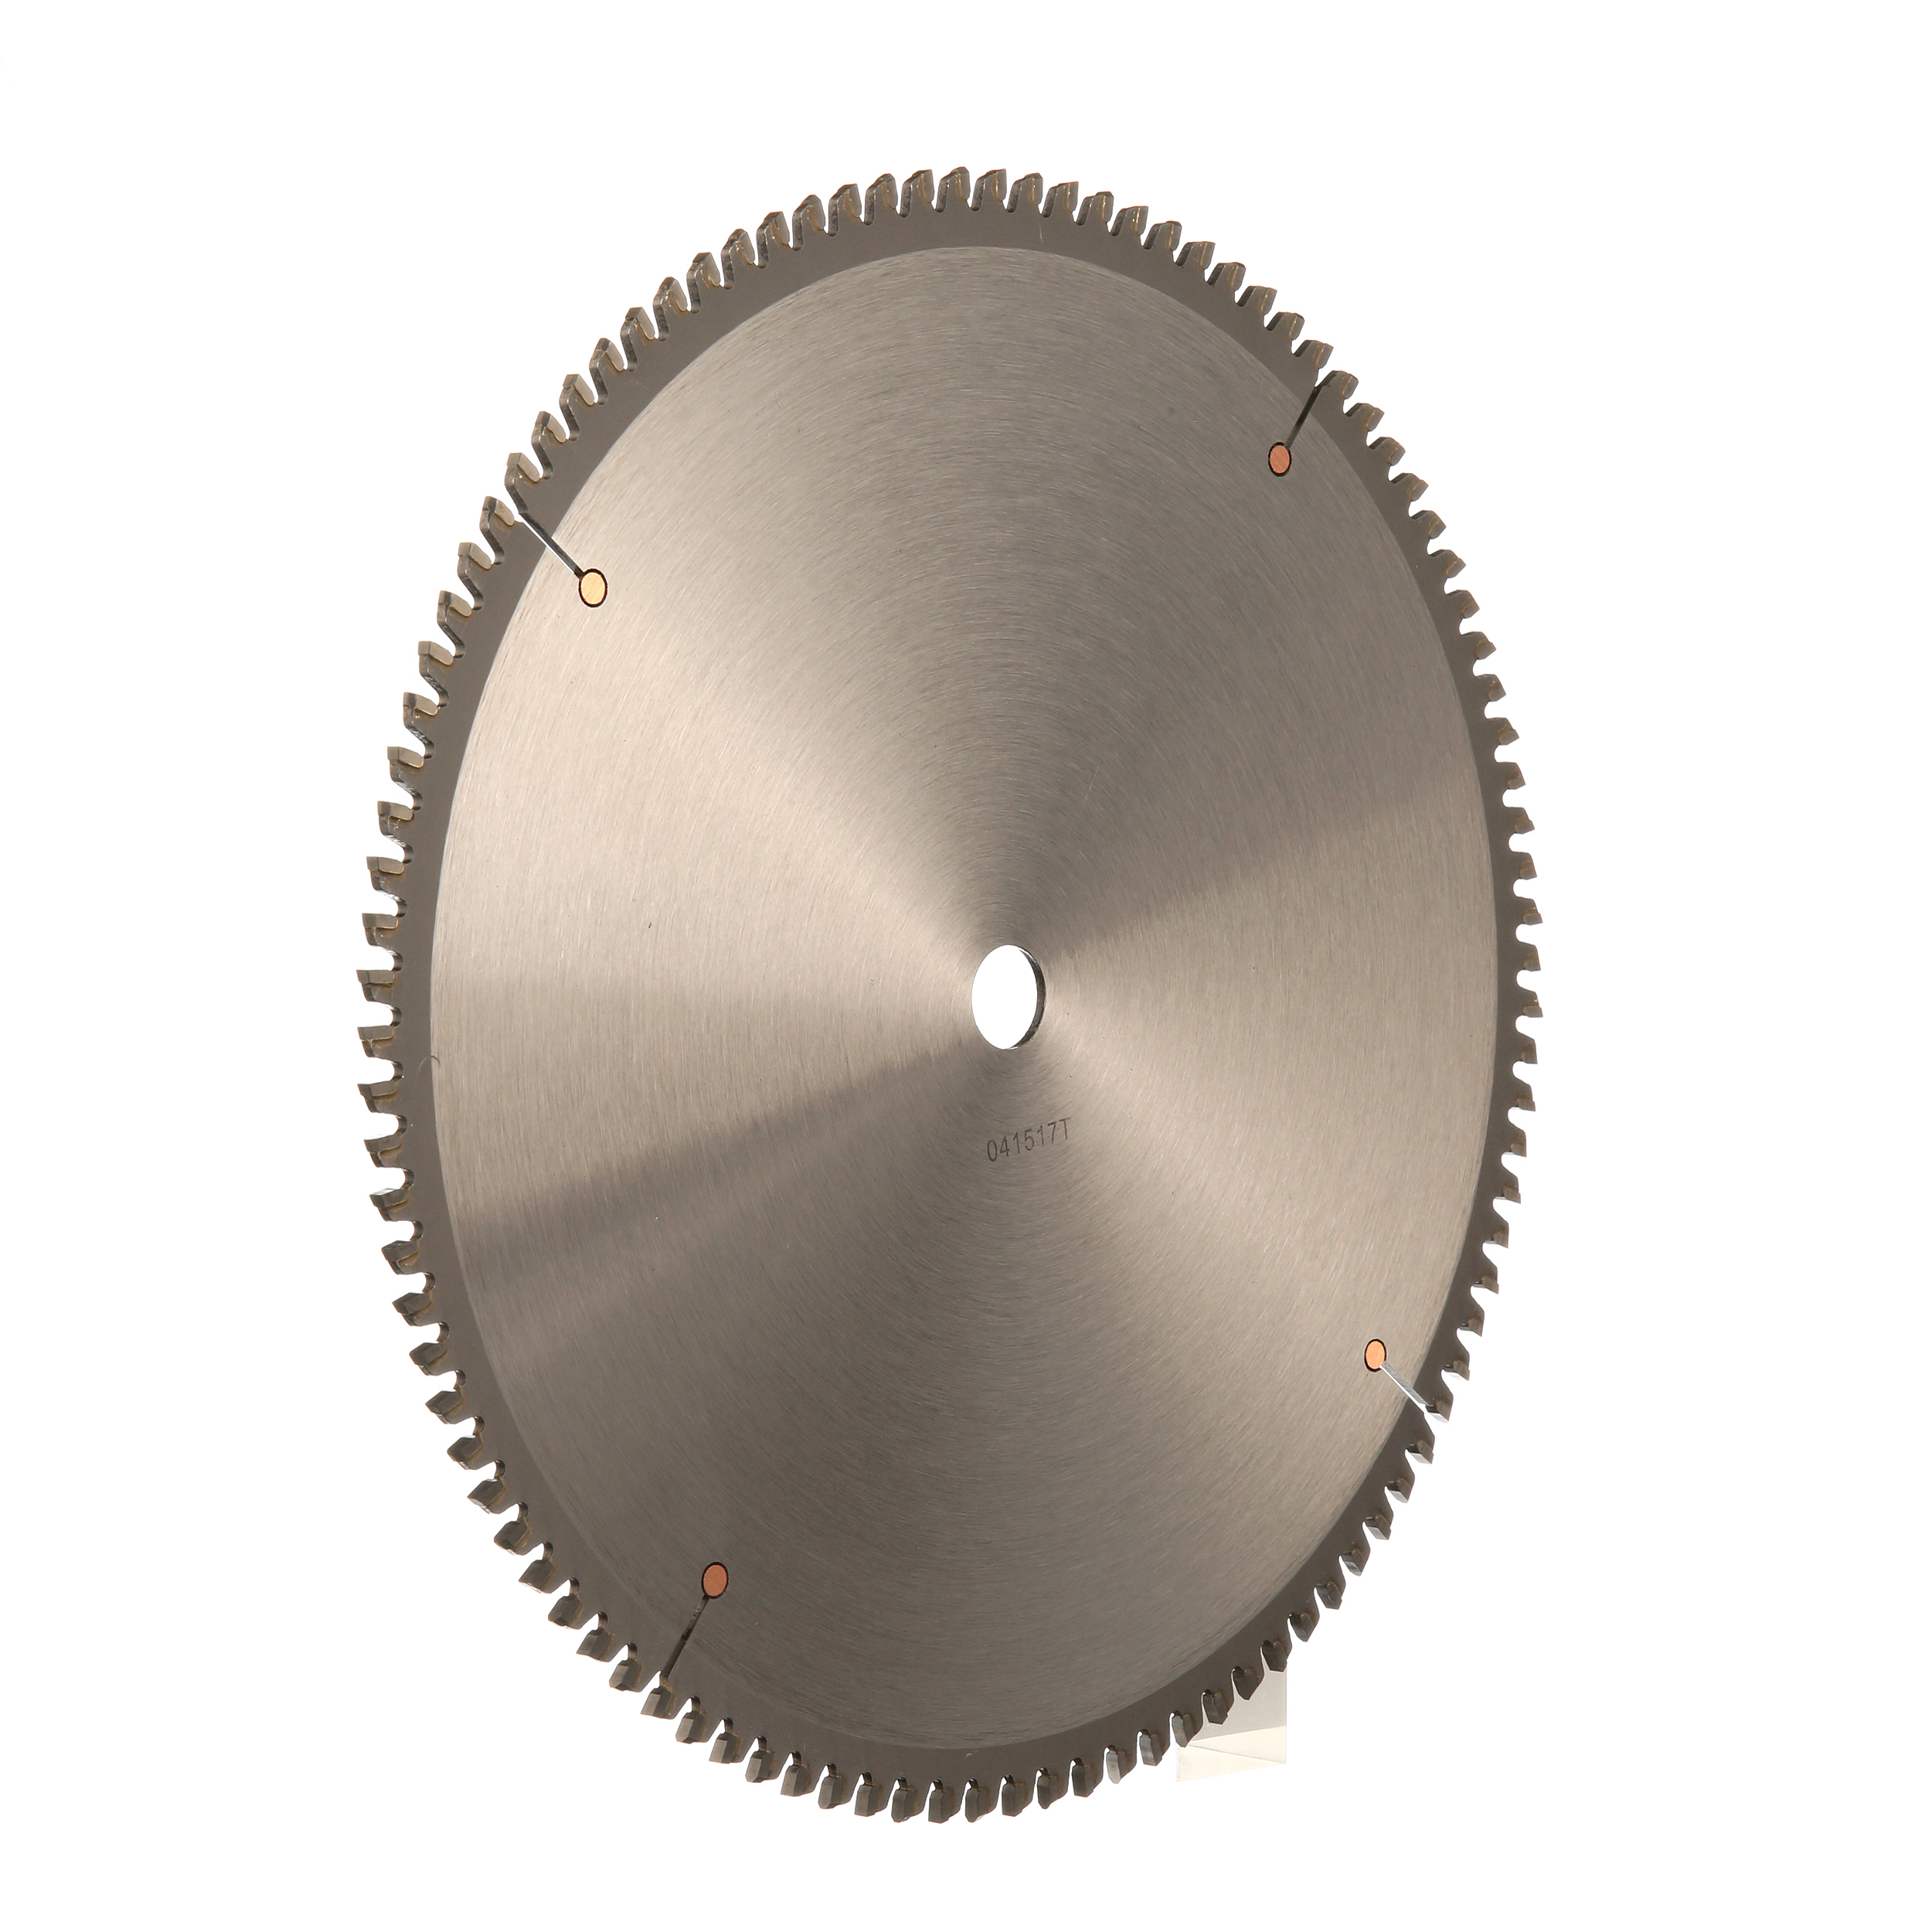 Oshlun SBNF-100100 10-Inch 100 Tooth TCG Saw Blade with 5/8-Inch Arbor for  Aluminum and Non Ferrous Metals